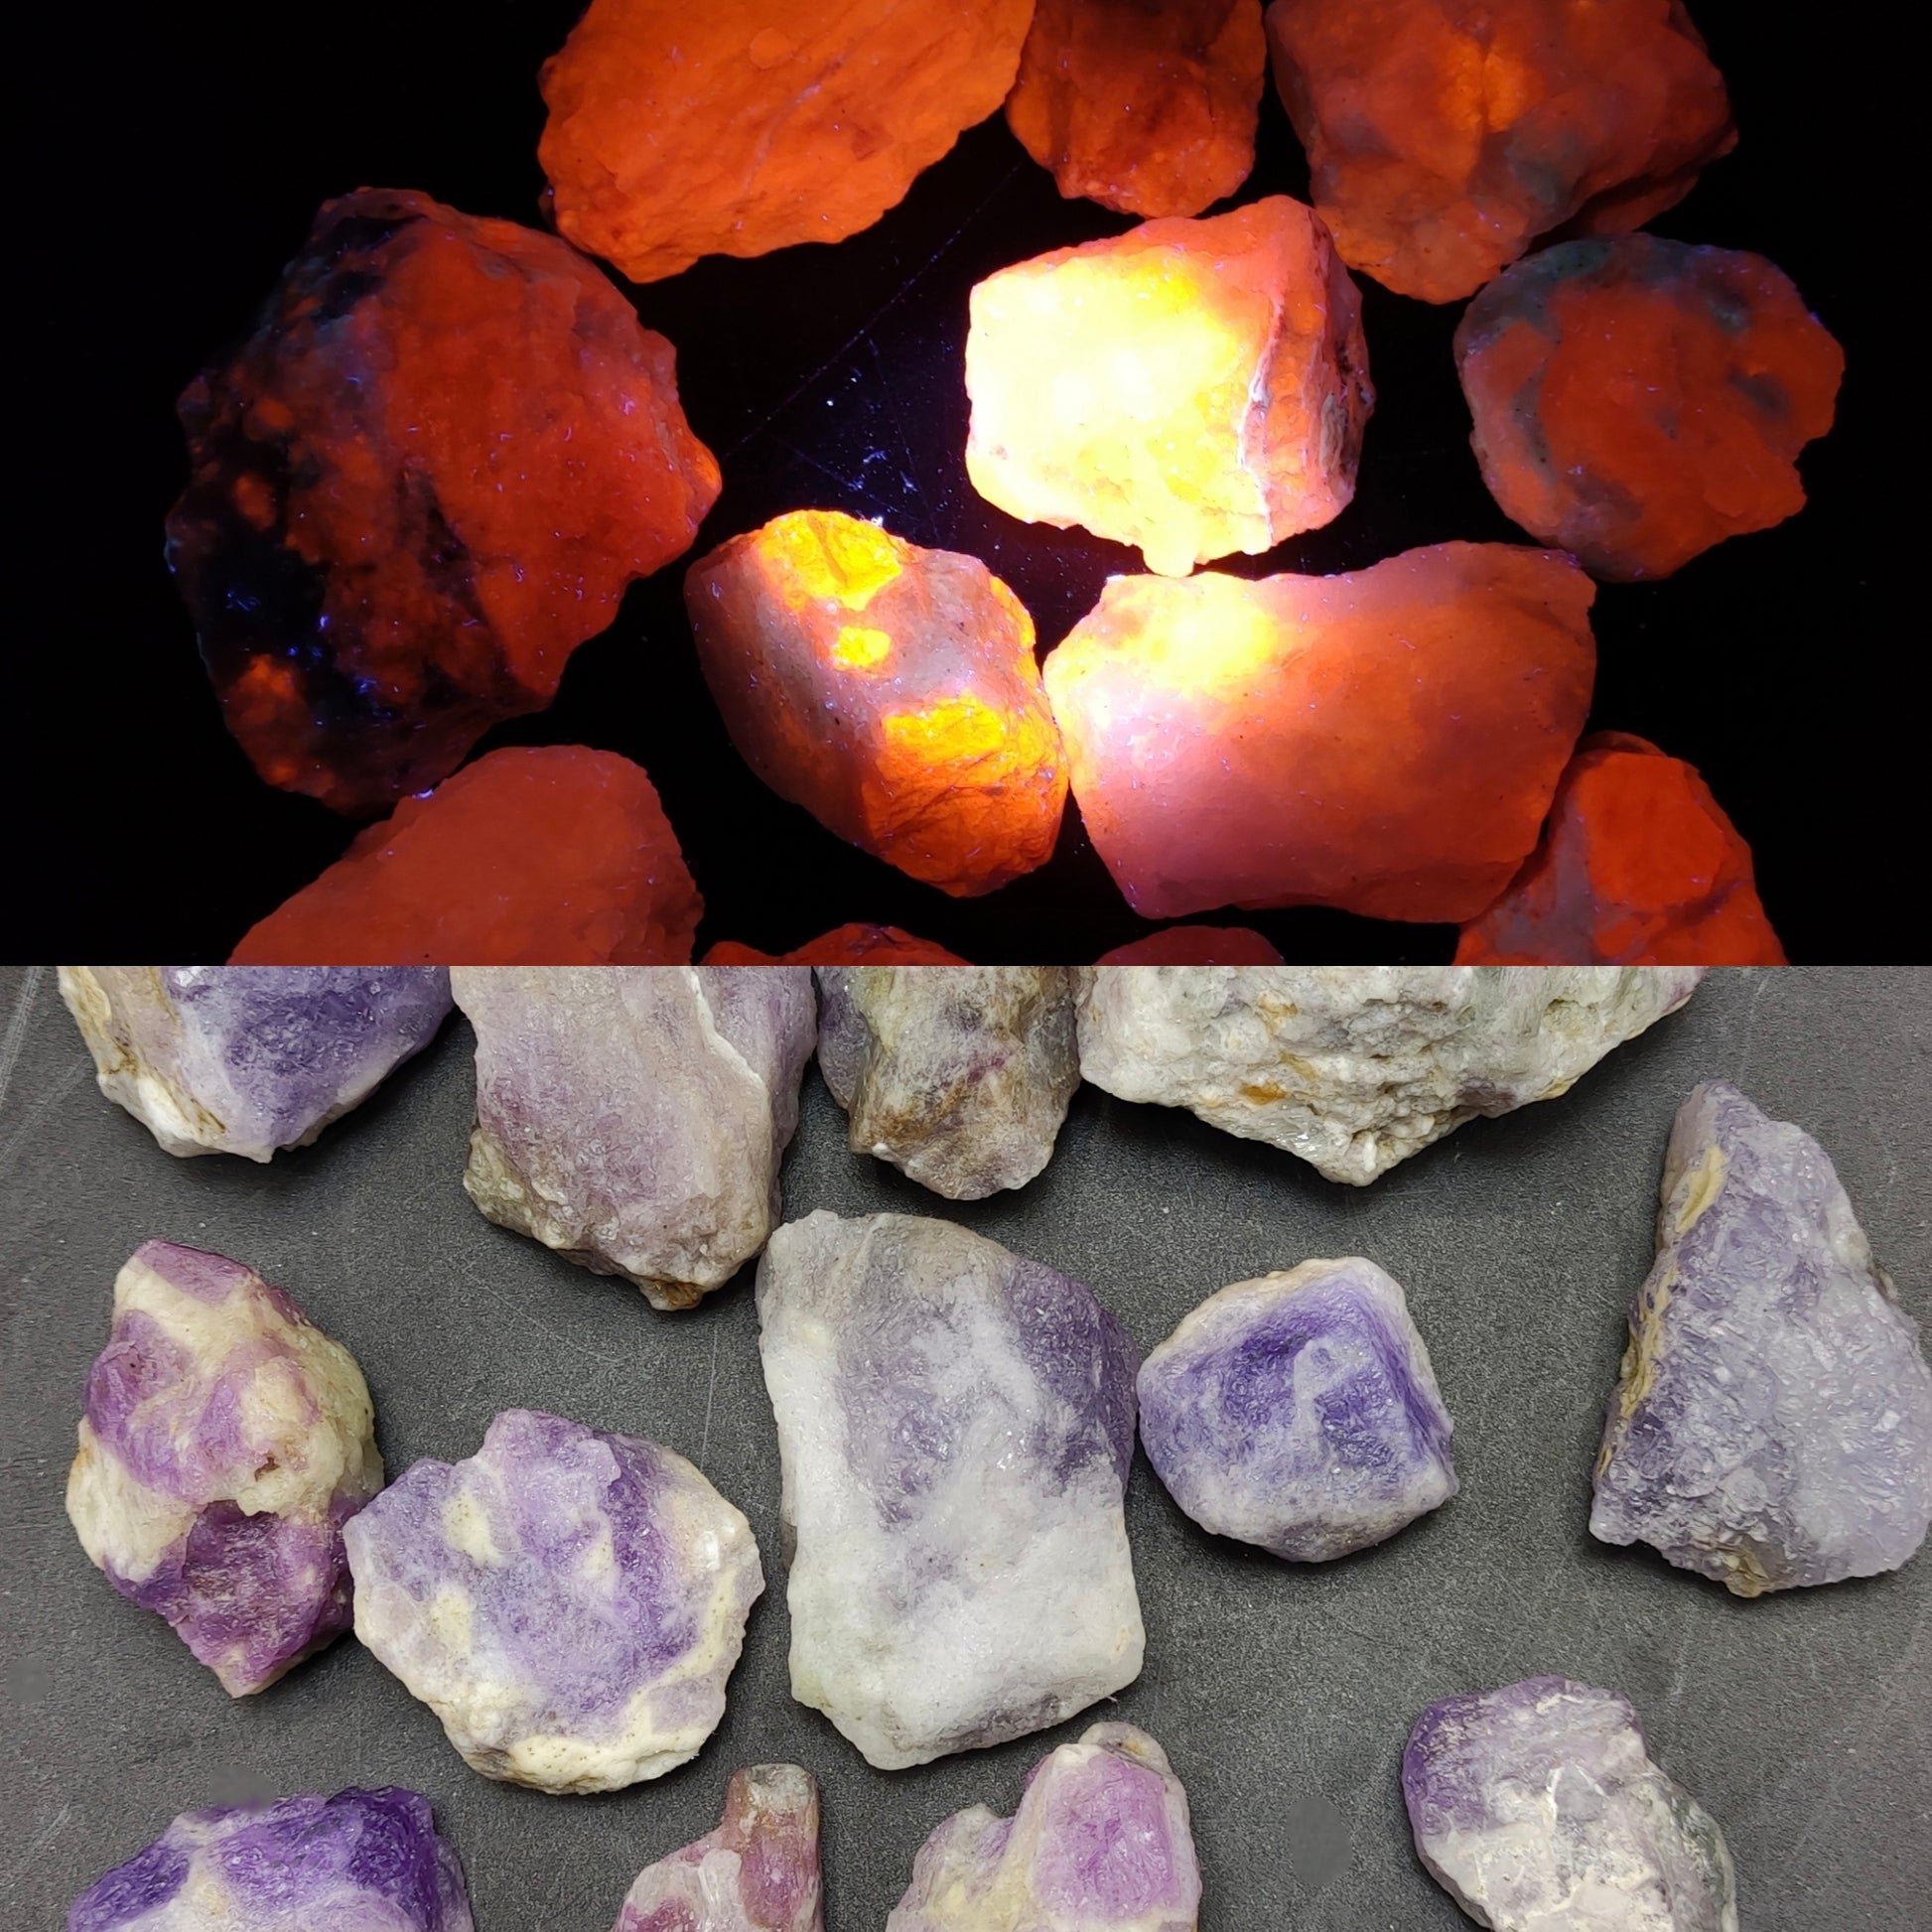 ARSAA GEMS AND MINERALSNatural 12 pieces small lot of UV reactive hackmanite crystals from Afghanistan, 253 grams - Premium Hackmanite Crystals from ARSAA GEMS AND MINERALS - Just $250! Shop now at ARSAA GEMS AND MINERALS